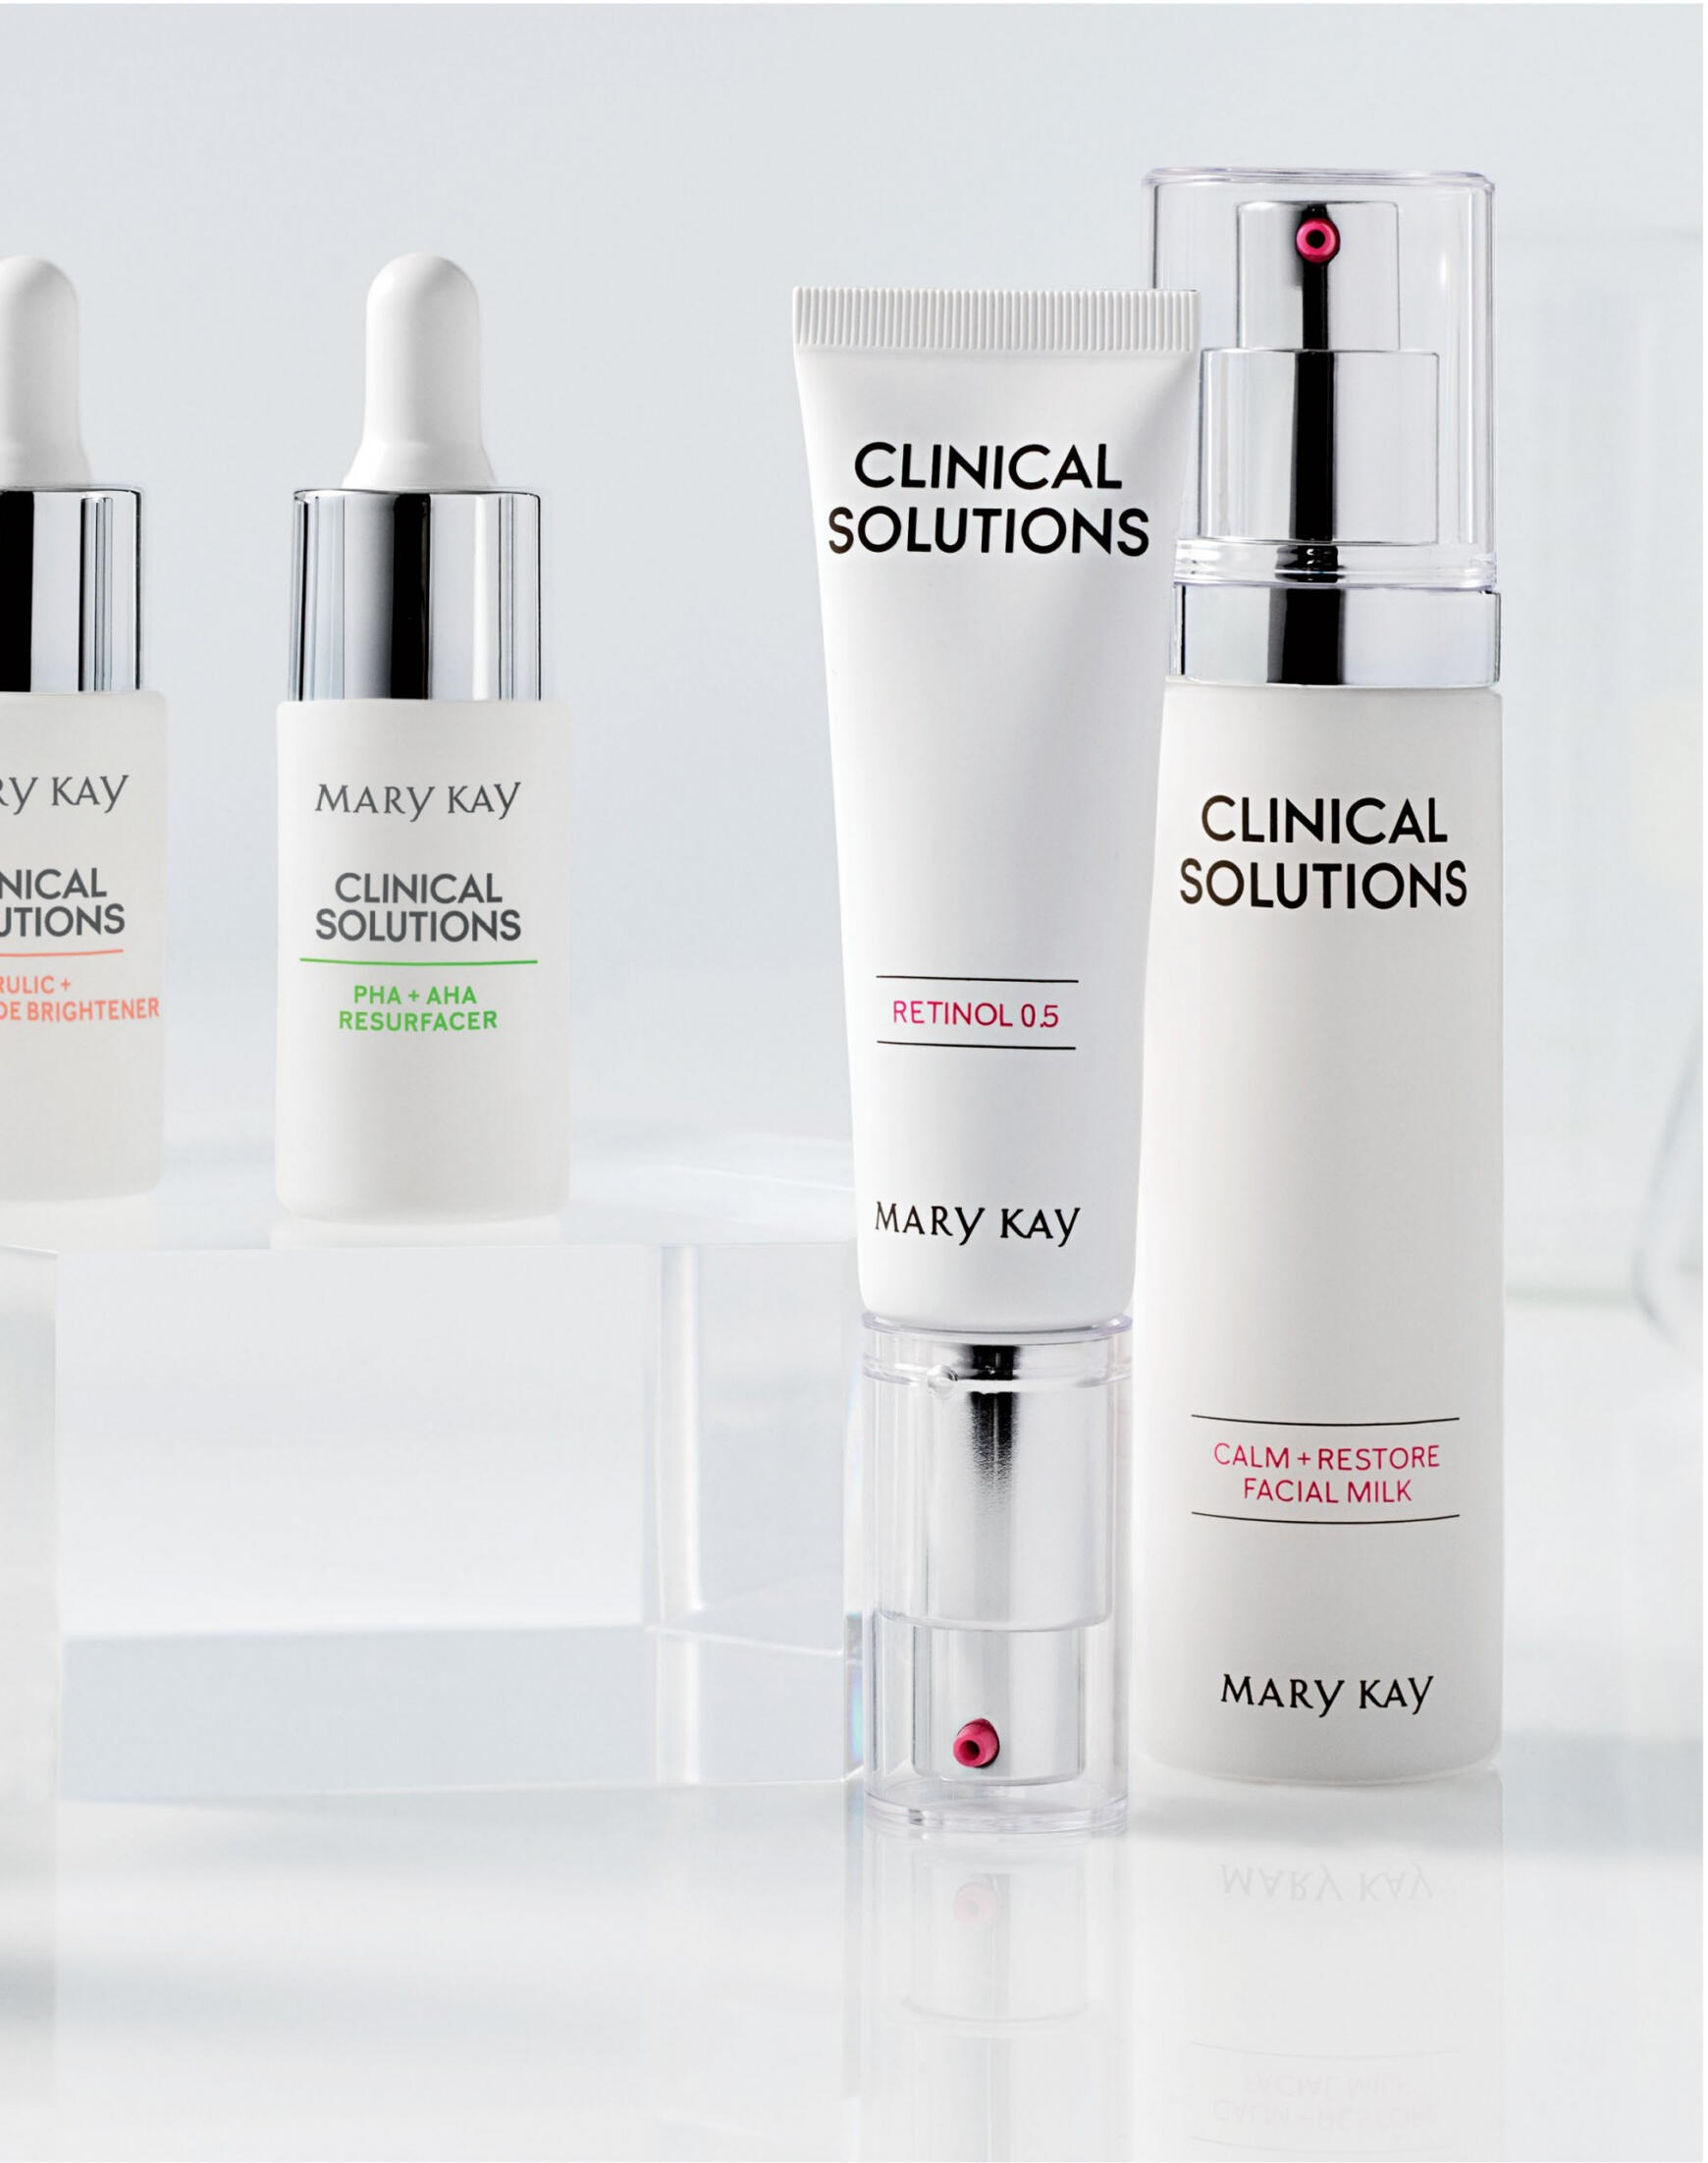 mary-kay - Mary Kay Clinical Solutions® - page: 37